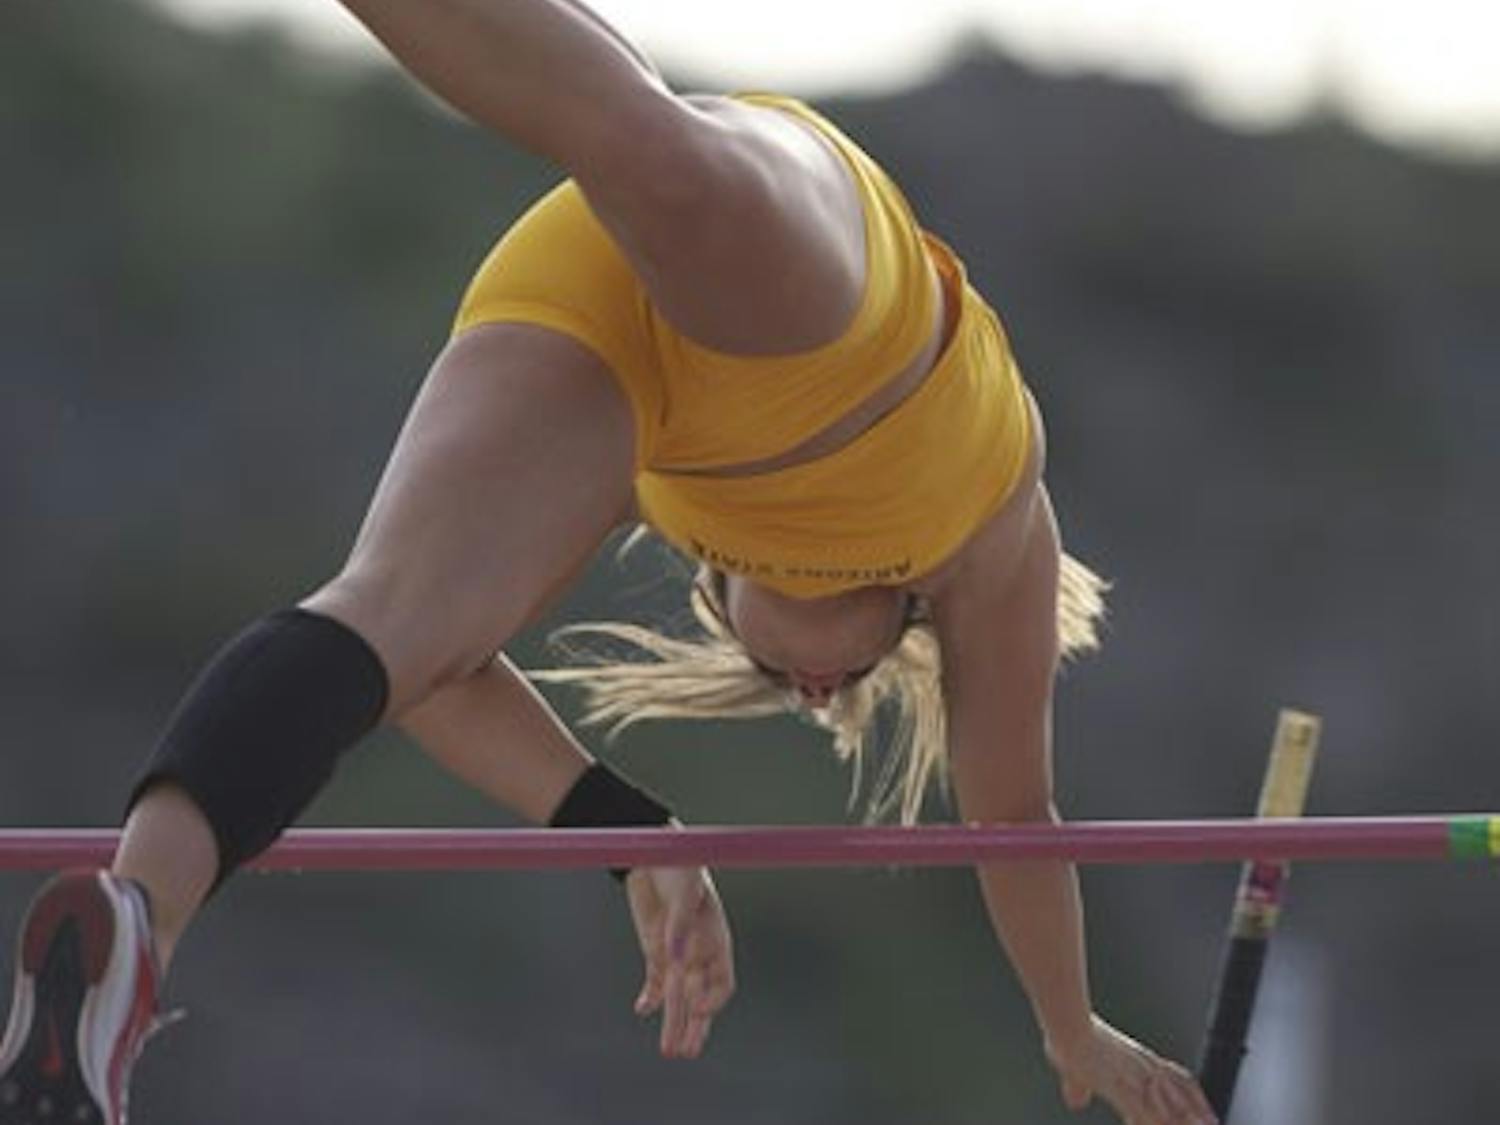 OVER THE WALL: Sophomore pole vaulter Cara Carpenter makes it over the pole during the Baldy Castillo Invitational in March. Carpenter was one of many Sun Devils that starred at the Sun Devil Open, winning the pole vault by reaching 3.77 meters (12-04.50 feet). (Photo by Scott Stuk)